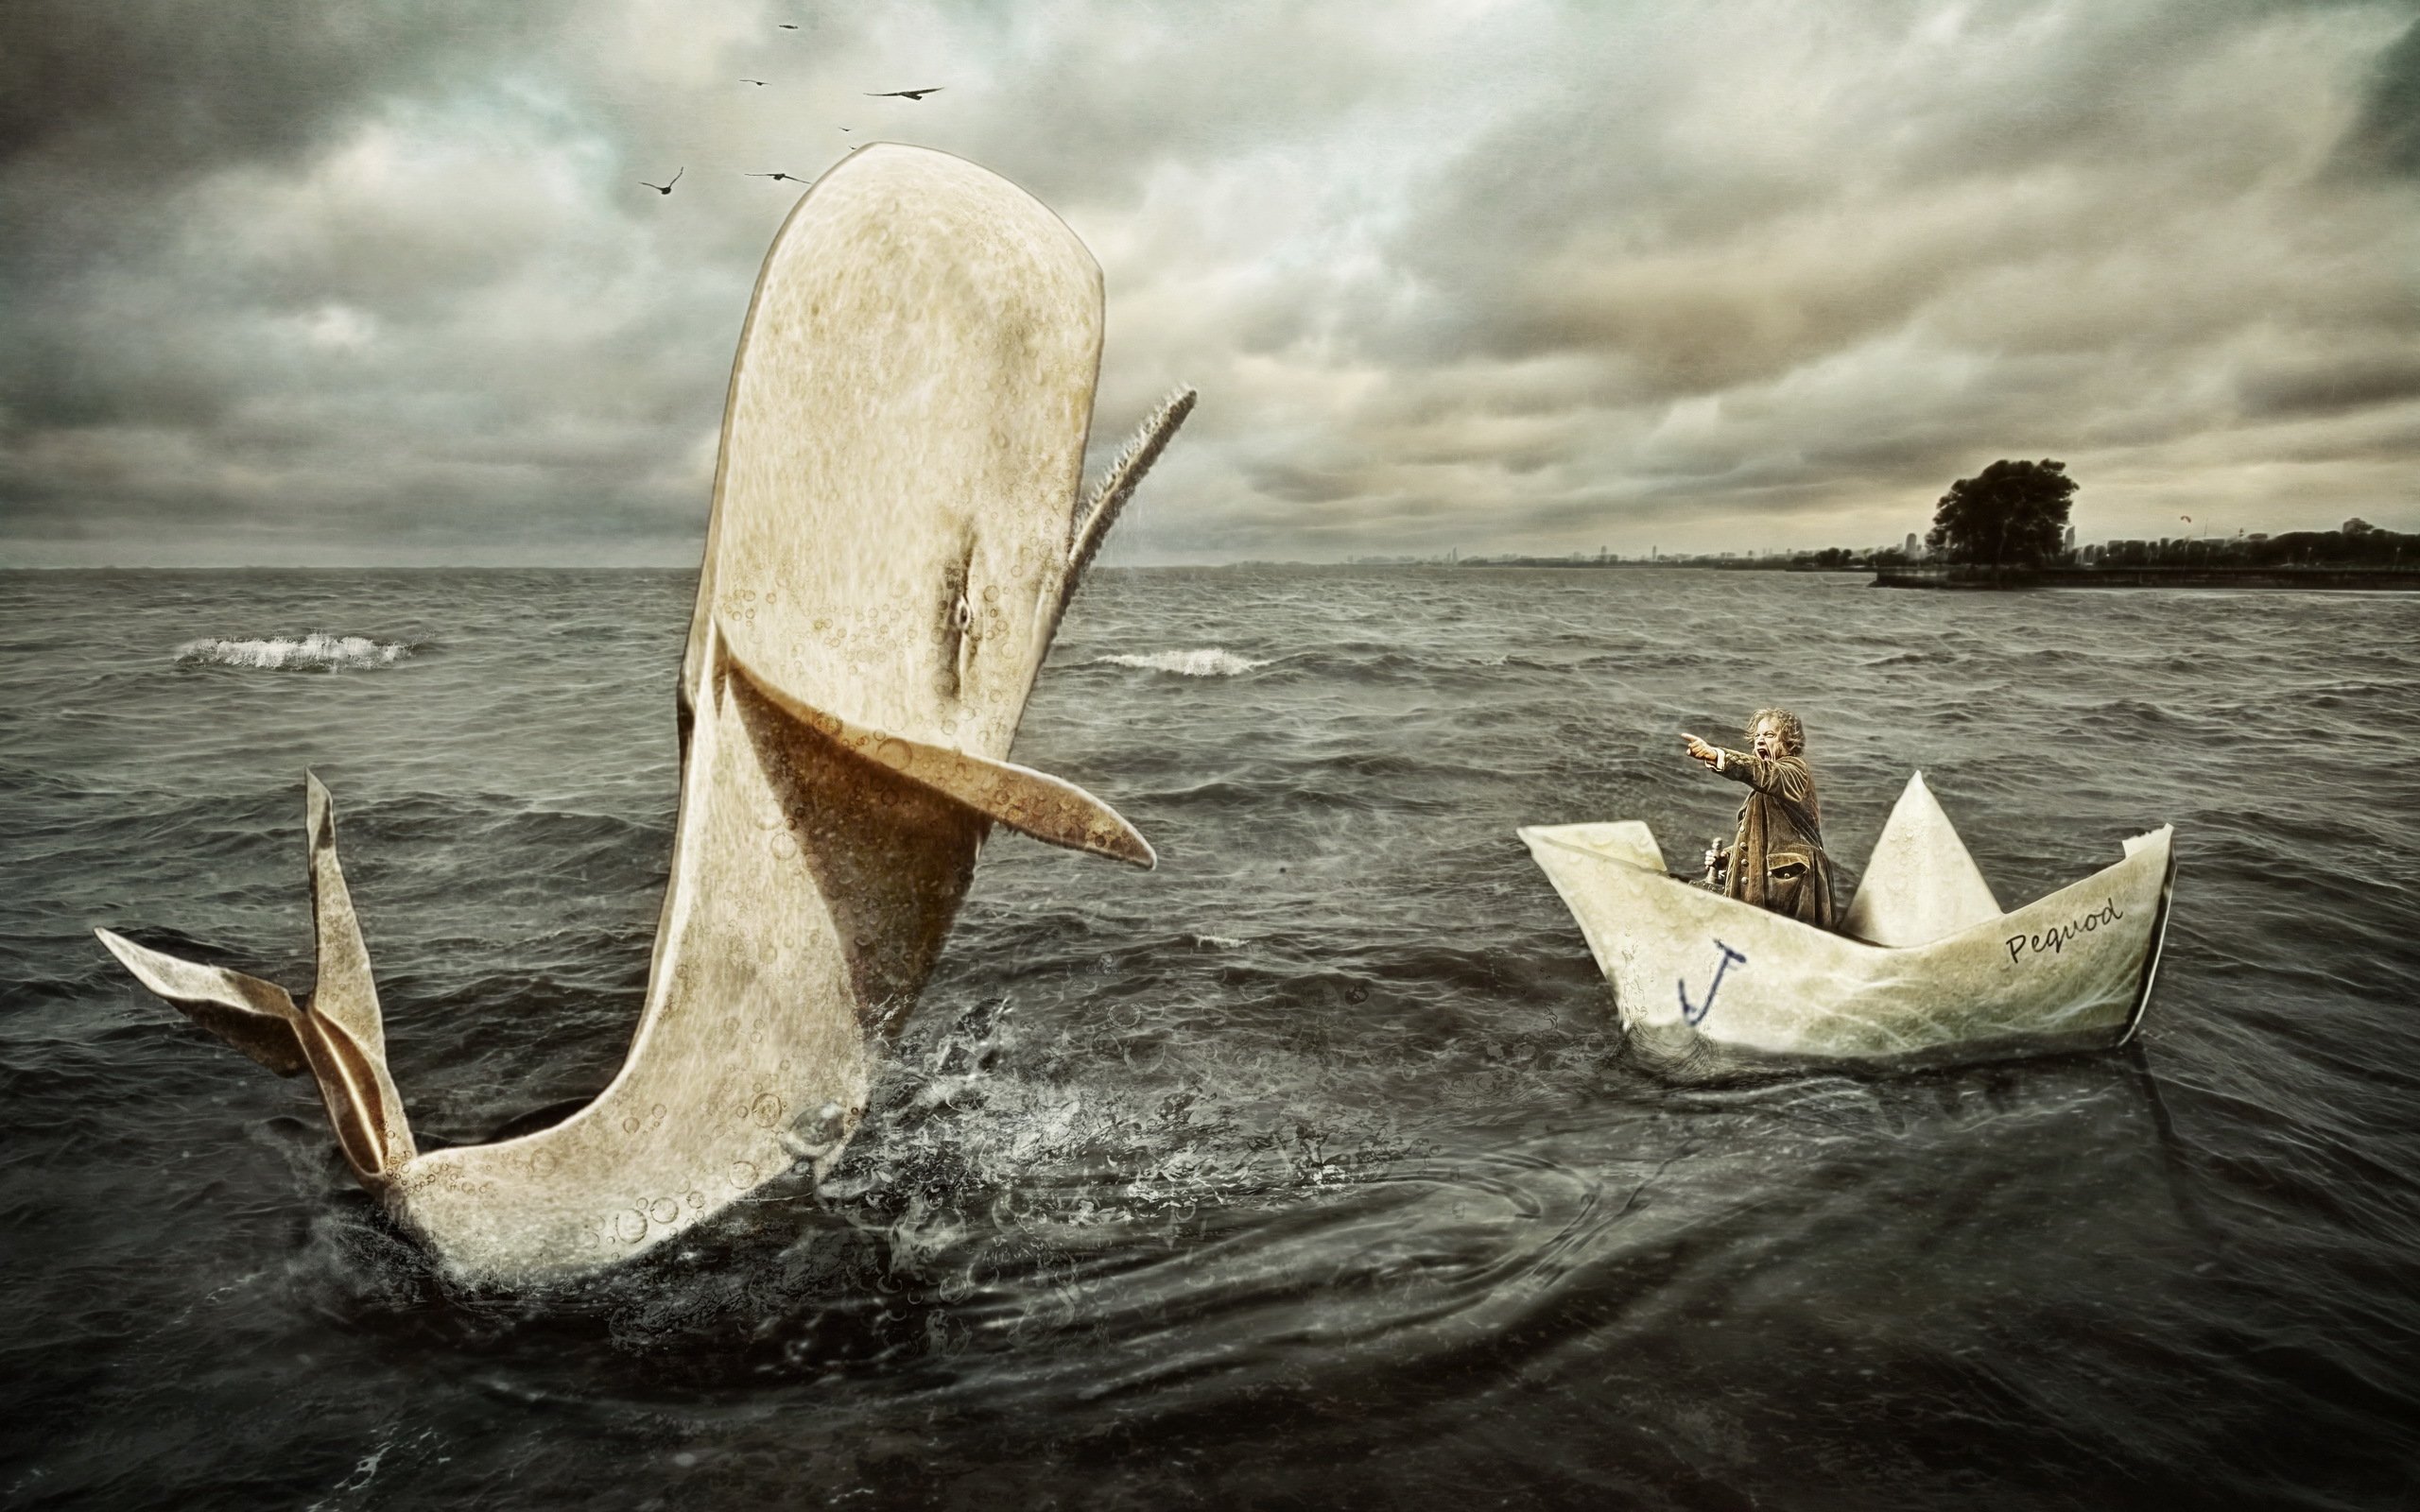 funny, Humor, Creative, Situation, Art, Artwork, Photoshop, Manipulation, Fantasy, Photo, Artistic, Psychedelic Wallpaper